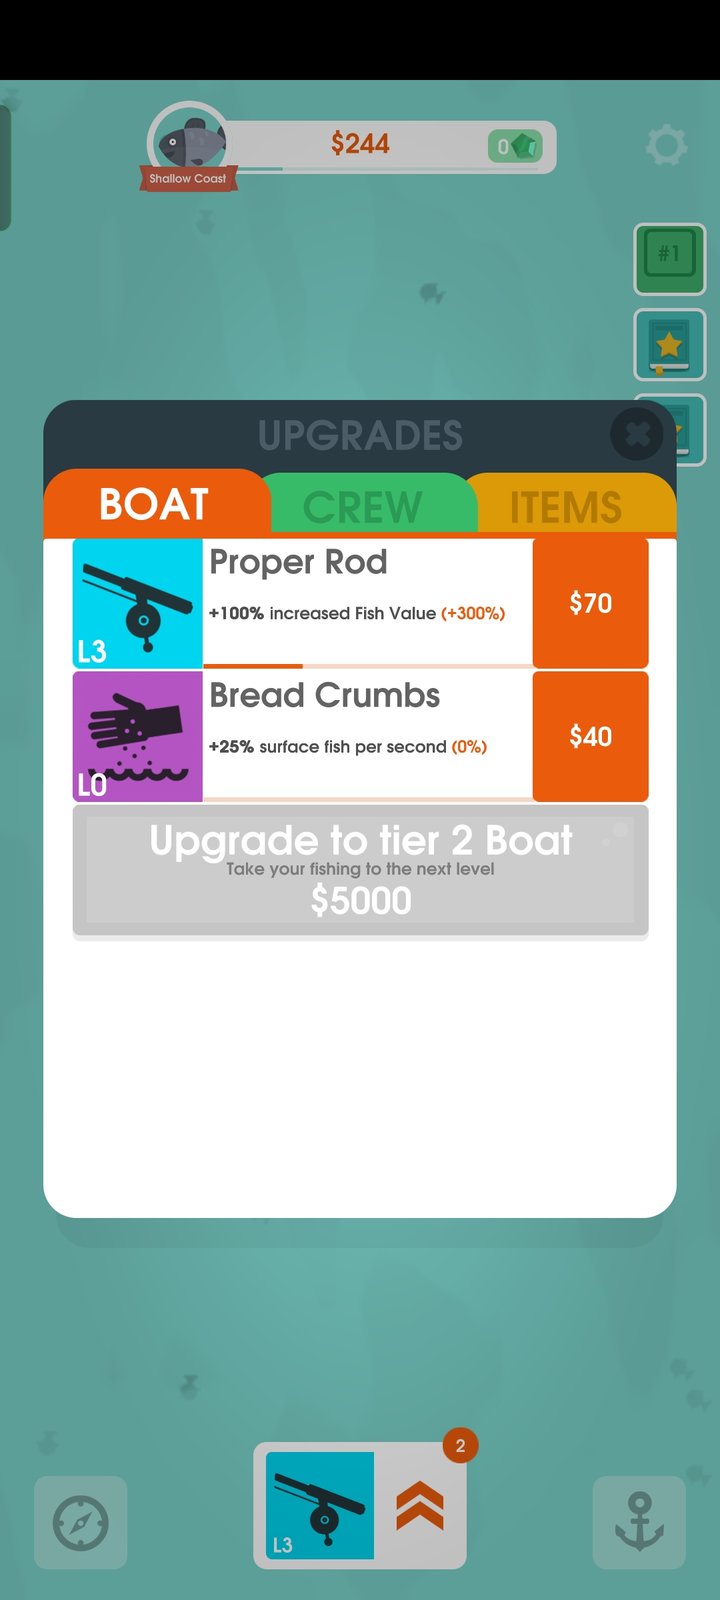 Hooked Inc APK 2.29.5 Download for Android - Latest version